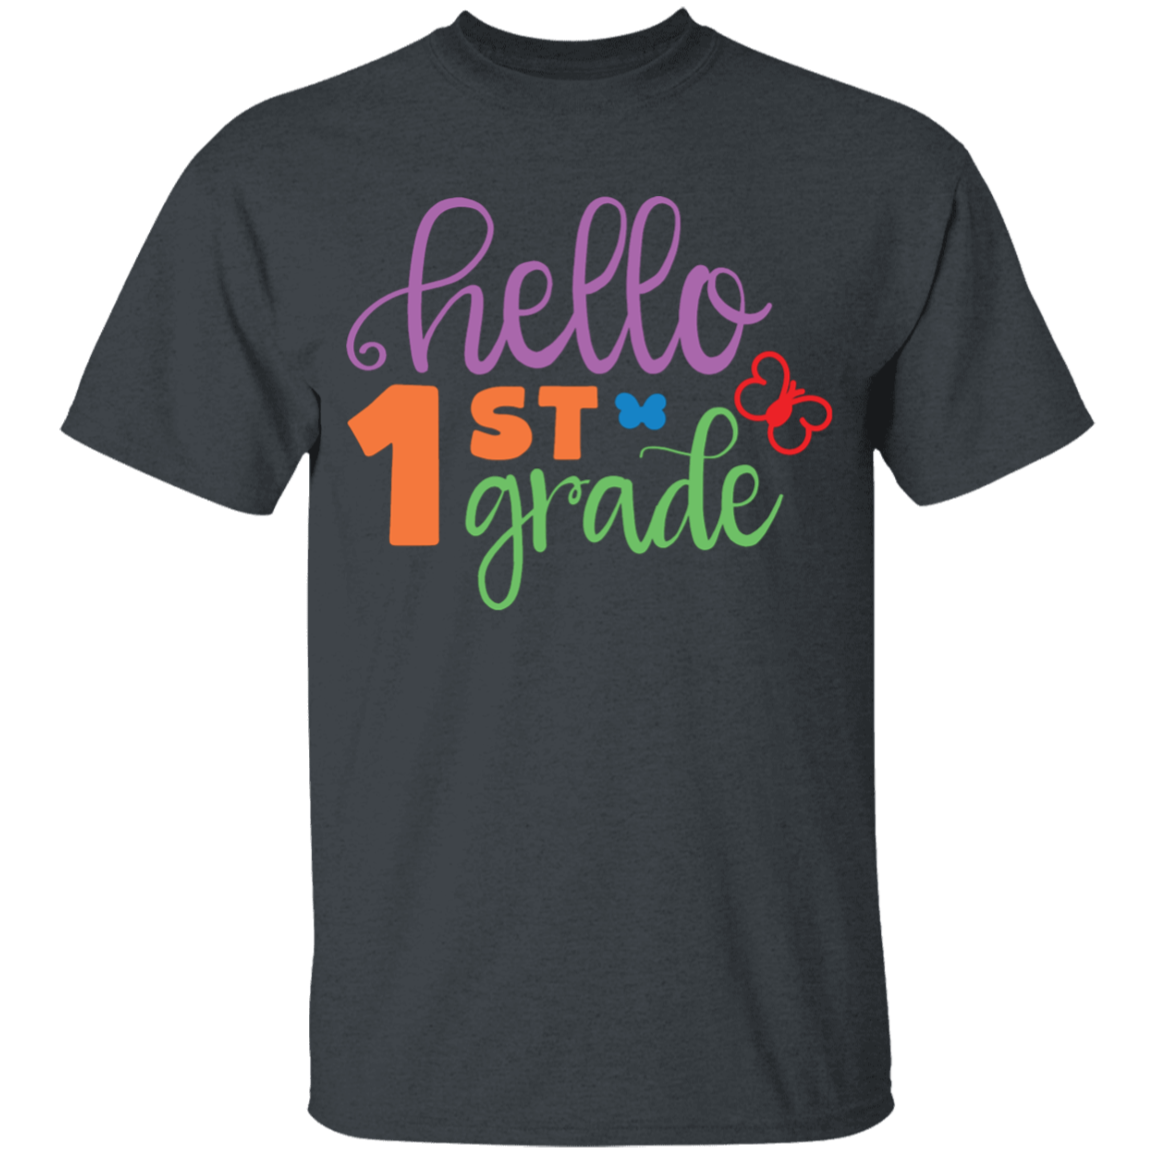 Get trendy with I'm Gonna Rock First Grade - T-Shirts available at Good Gift Company. Grab yours for $20.42 today!